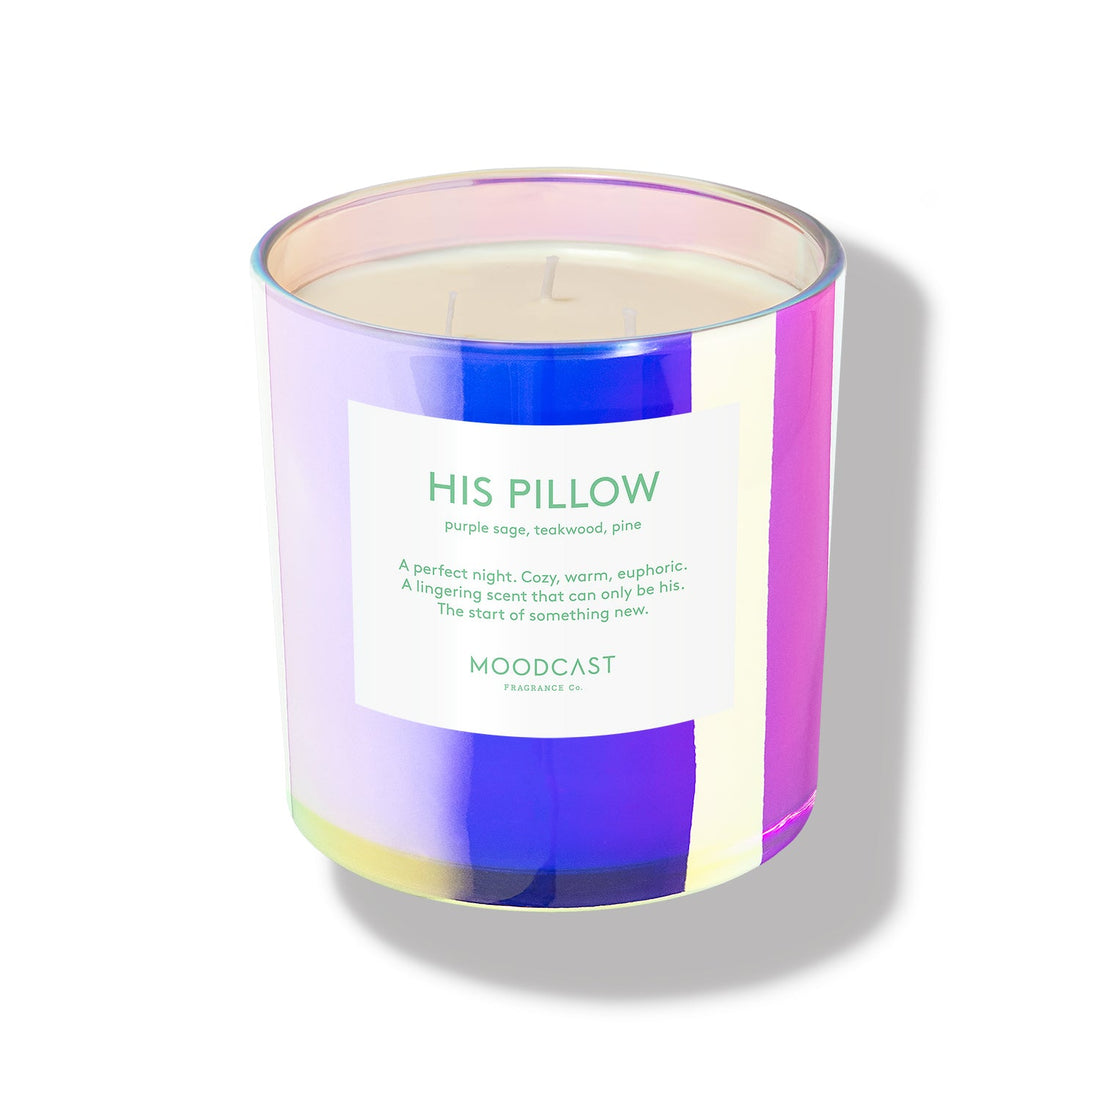 His Pillow - Vibes Collection (Iridescent) - 24oz/680g Coconut Wax Blend Glass Jar 3-Wick Candle - Key Notes: Purple Sage, Teakwood, Pine